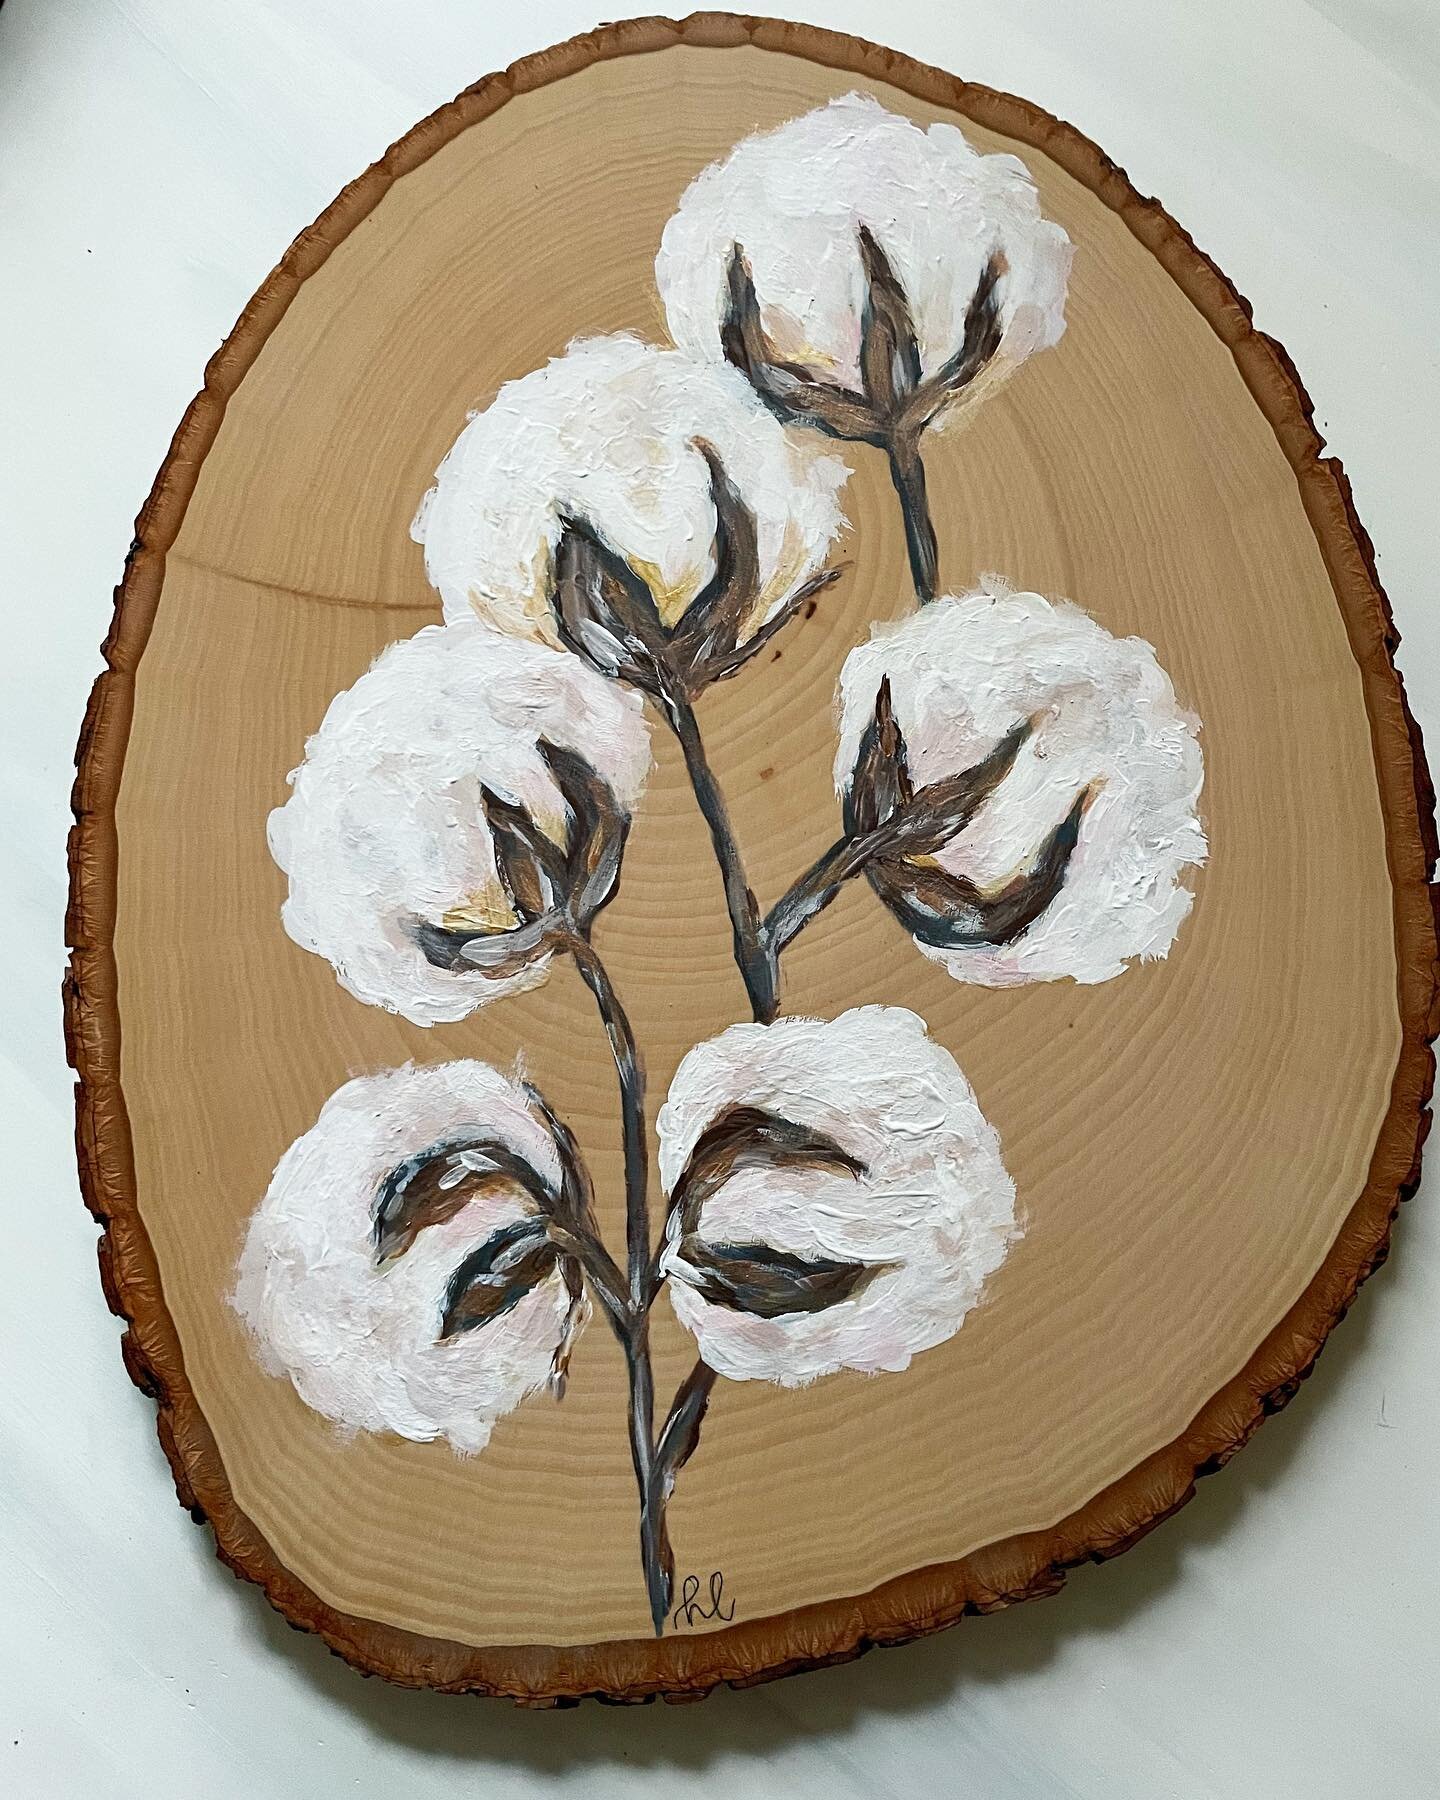 Cotton stems on wood slices

1 - Approximately 10x14, $60
2 - Approximately 9x12, $50